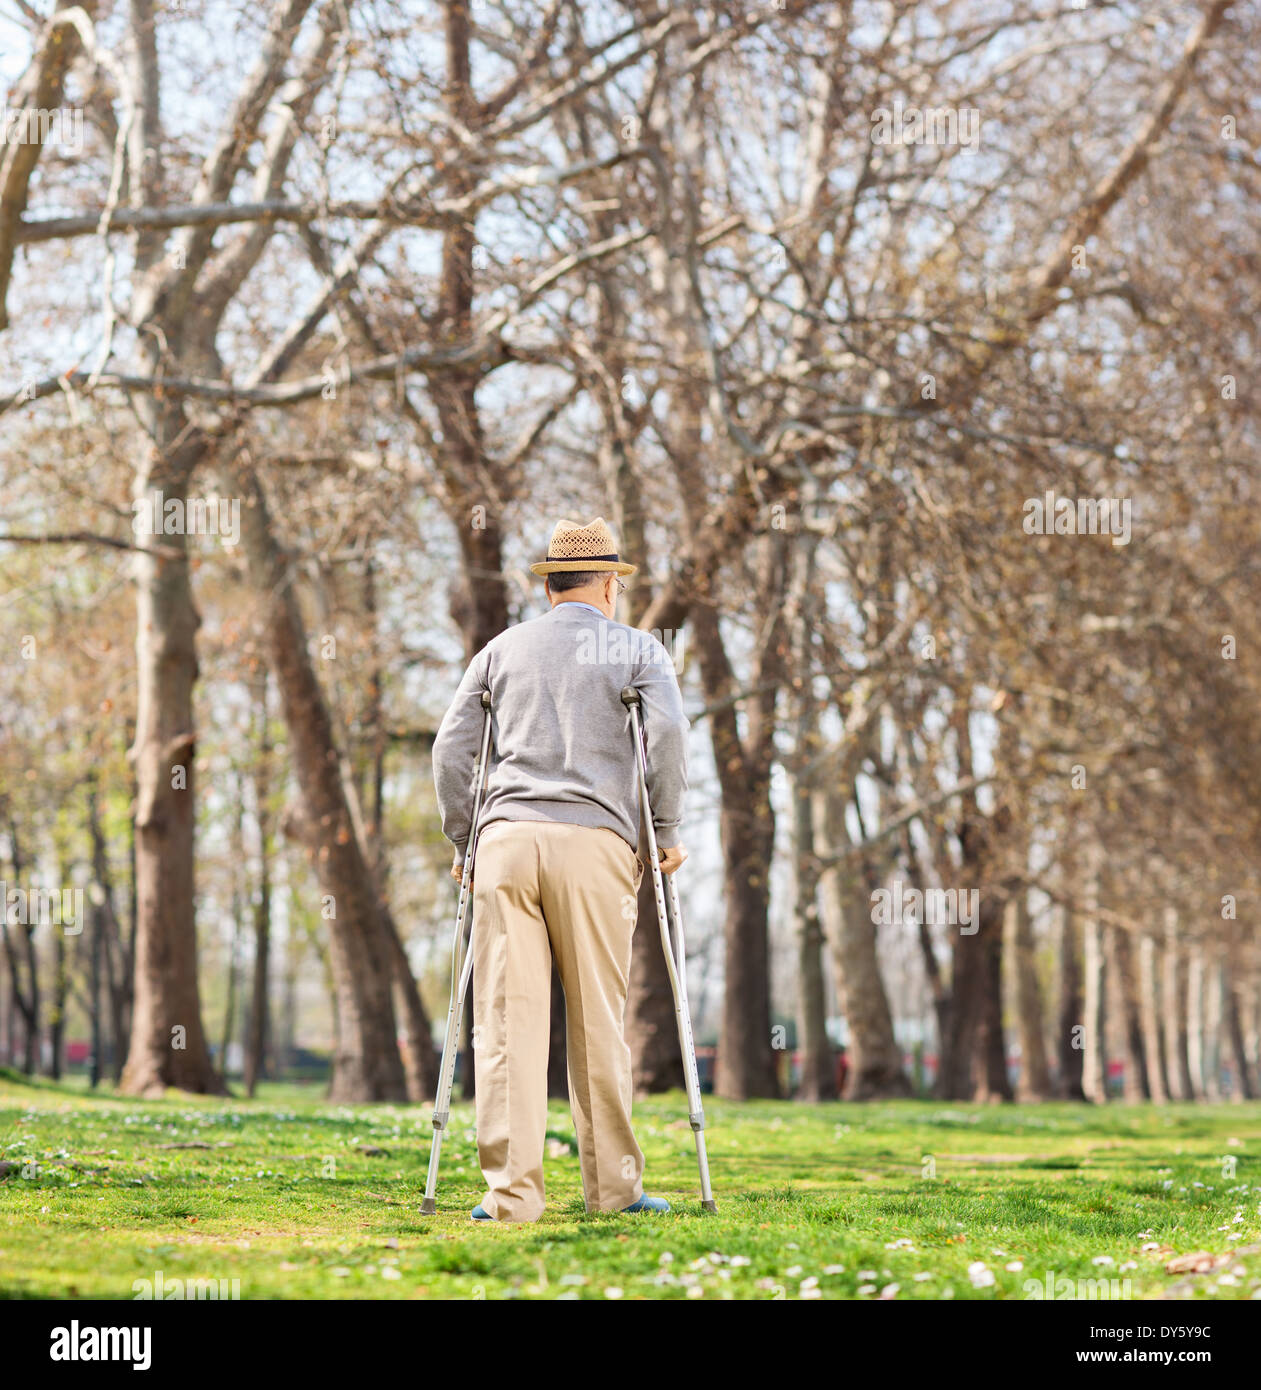 Senior man walking with crutches in park, rear view Stock Photo